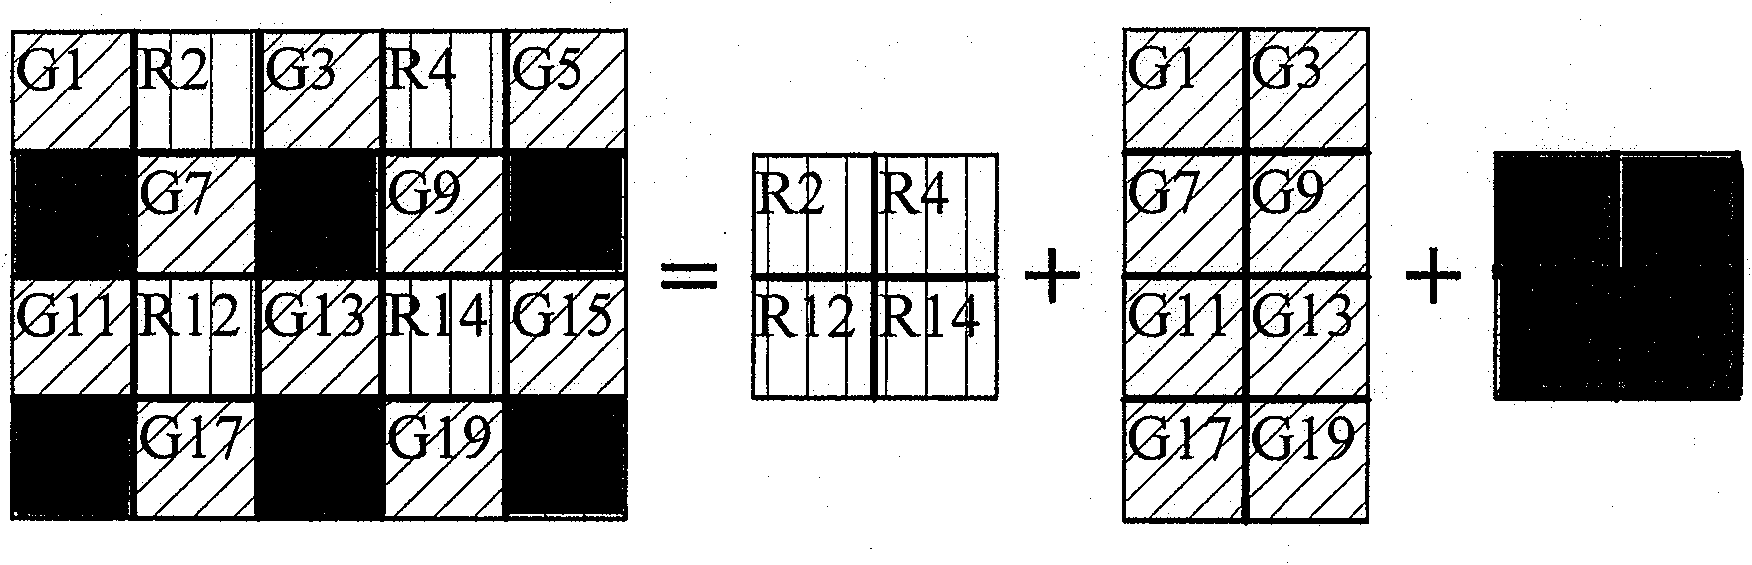 Lossless compression method applicable to Bayer image format